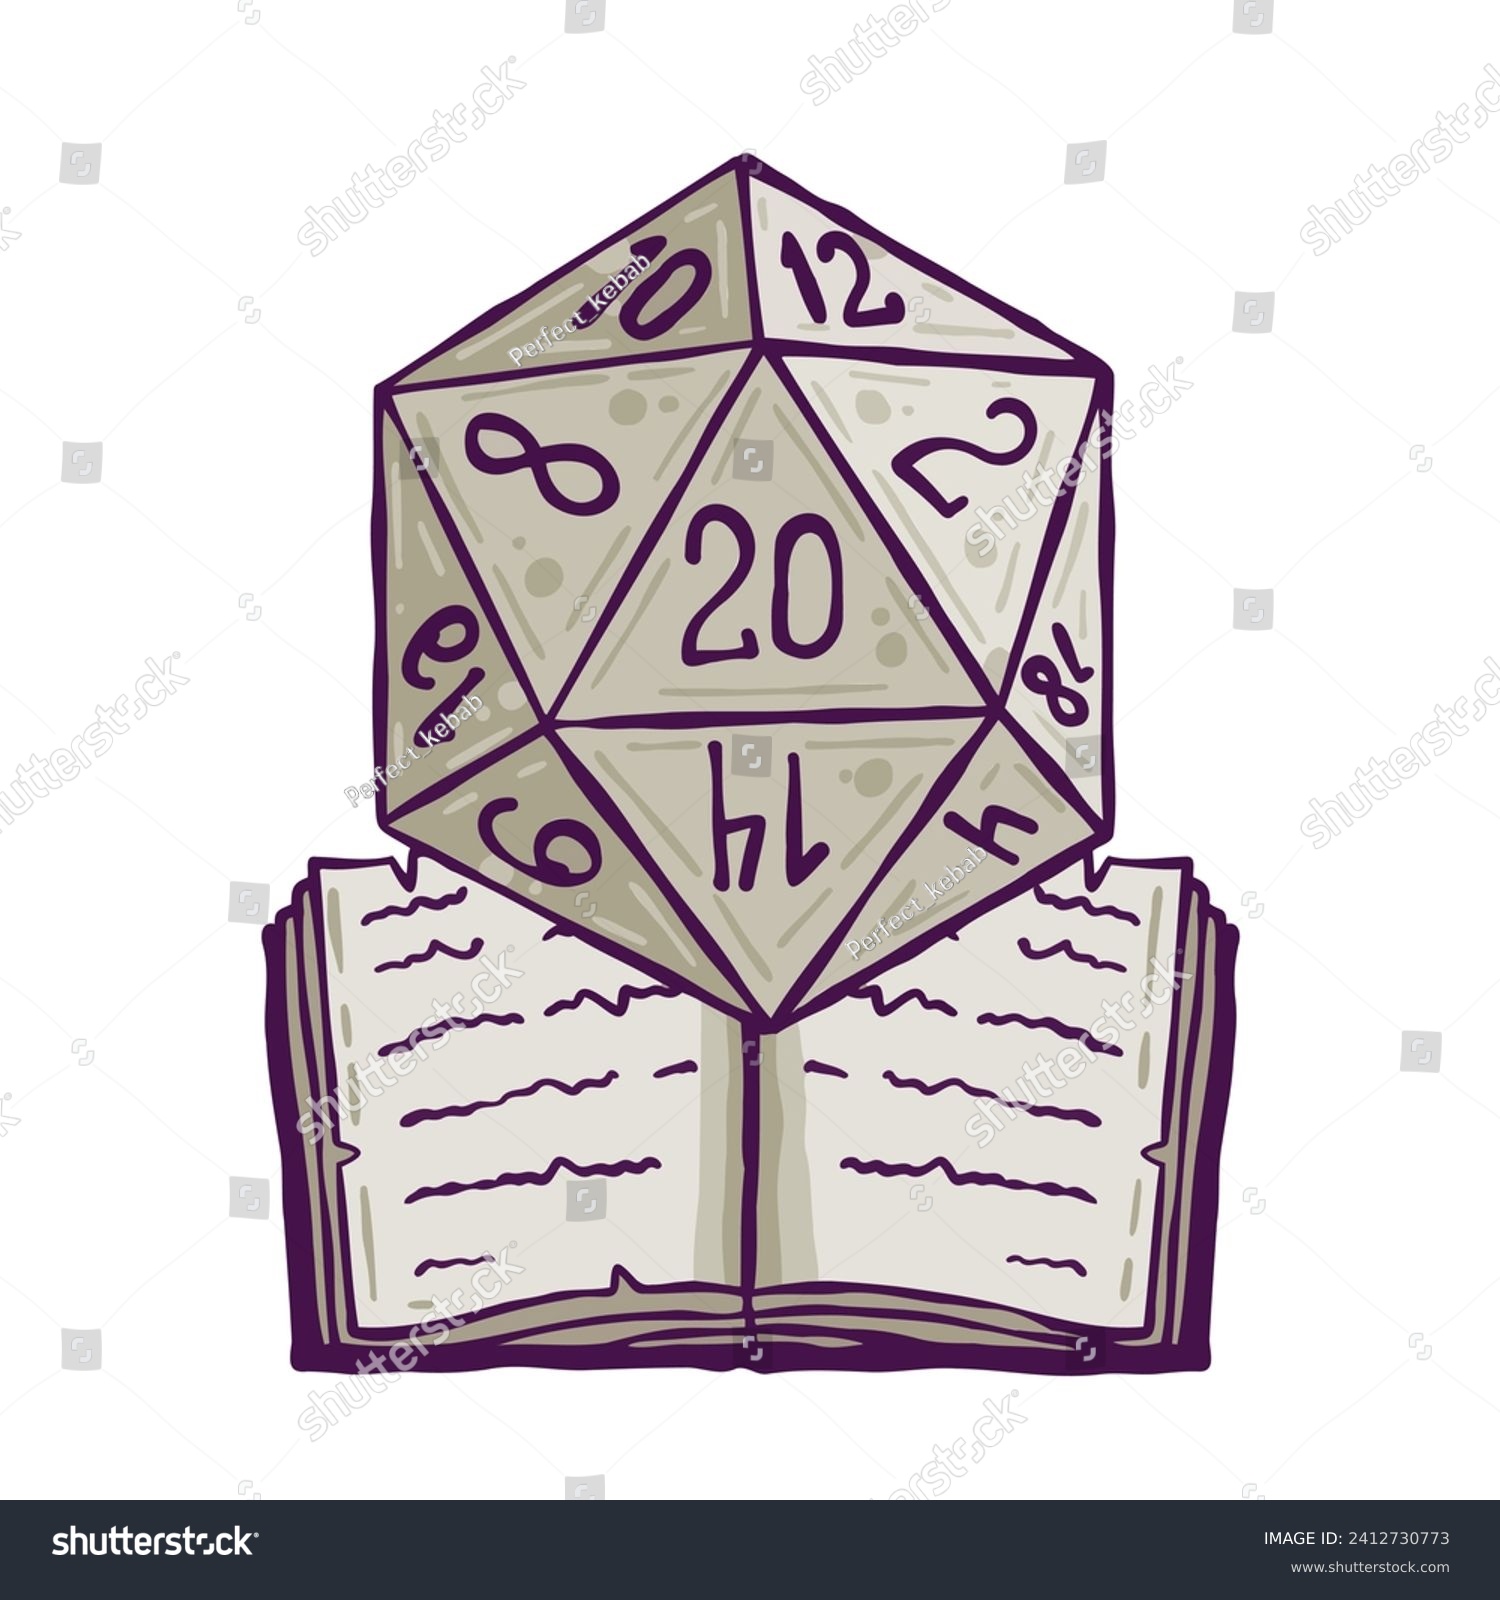 SVG of Dice d20 for playing board game. Cartoon outline drawn illustration svg